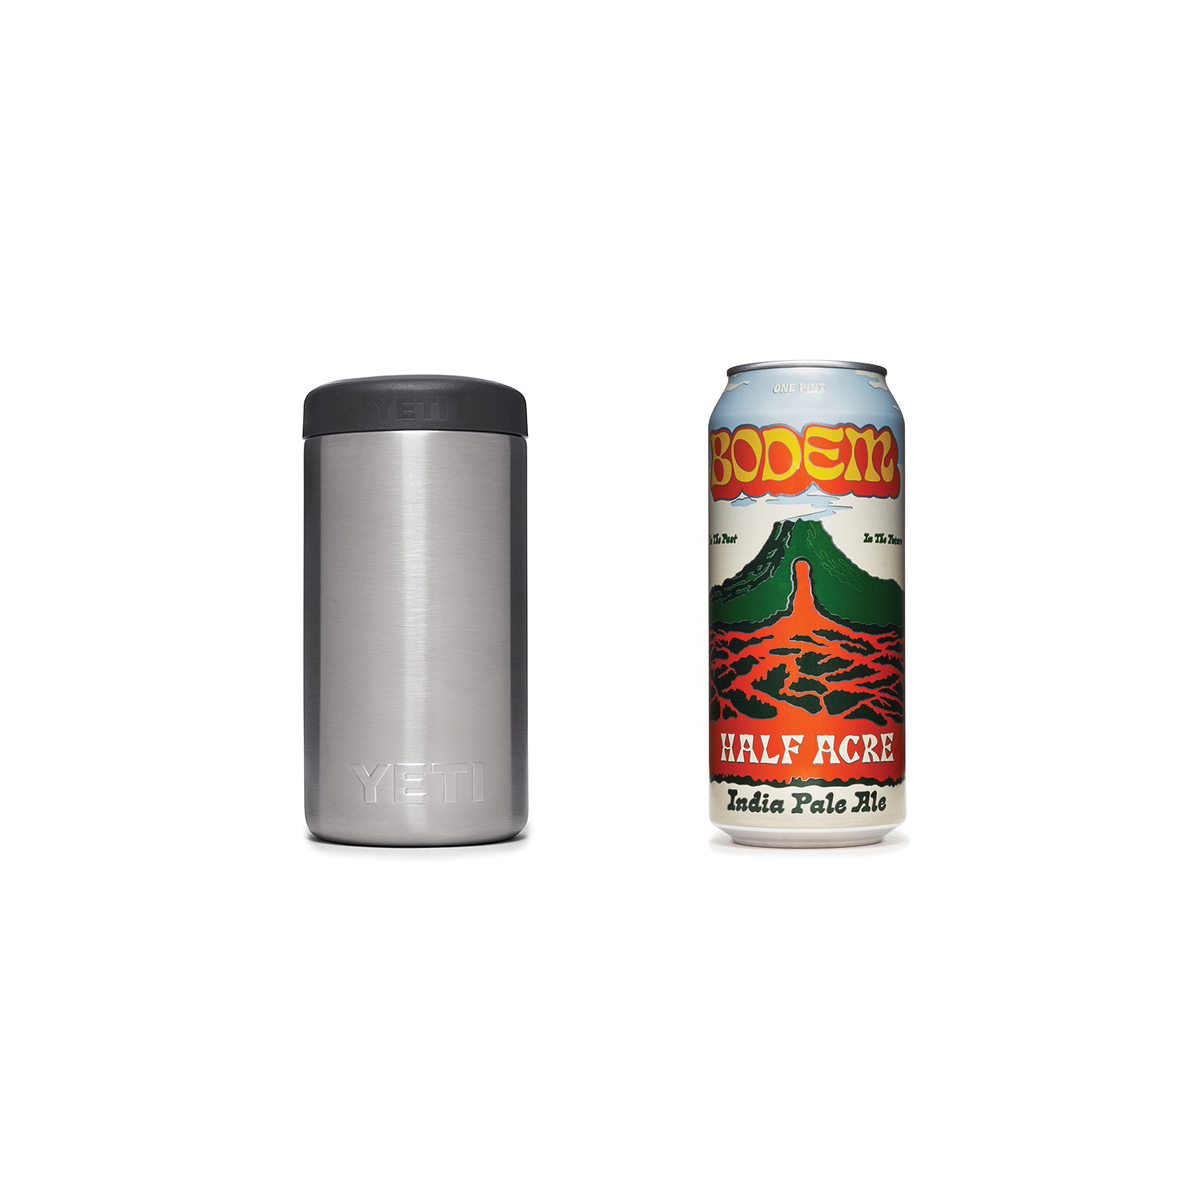 YETI Rambler 21070090082 Colster Can Insulator, 2-3/4 in Dia x 6-1/8 in H, 12 oz Can/Bottle, Stainless Steel, White - 4